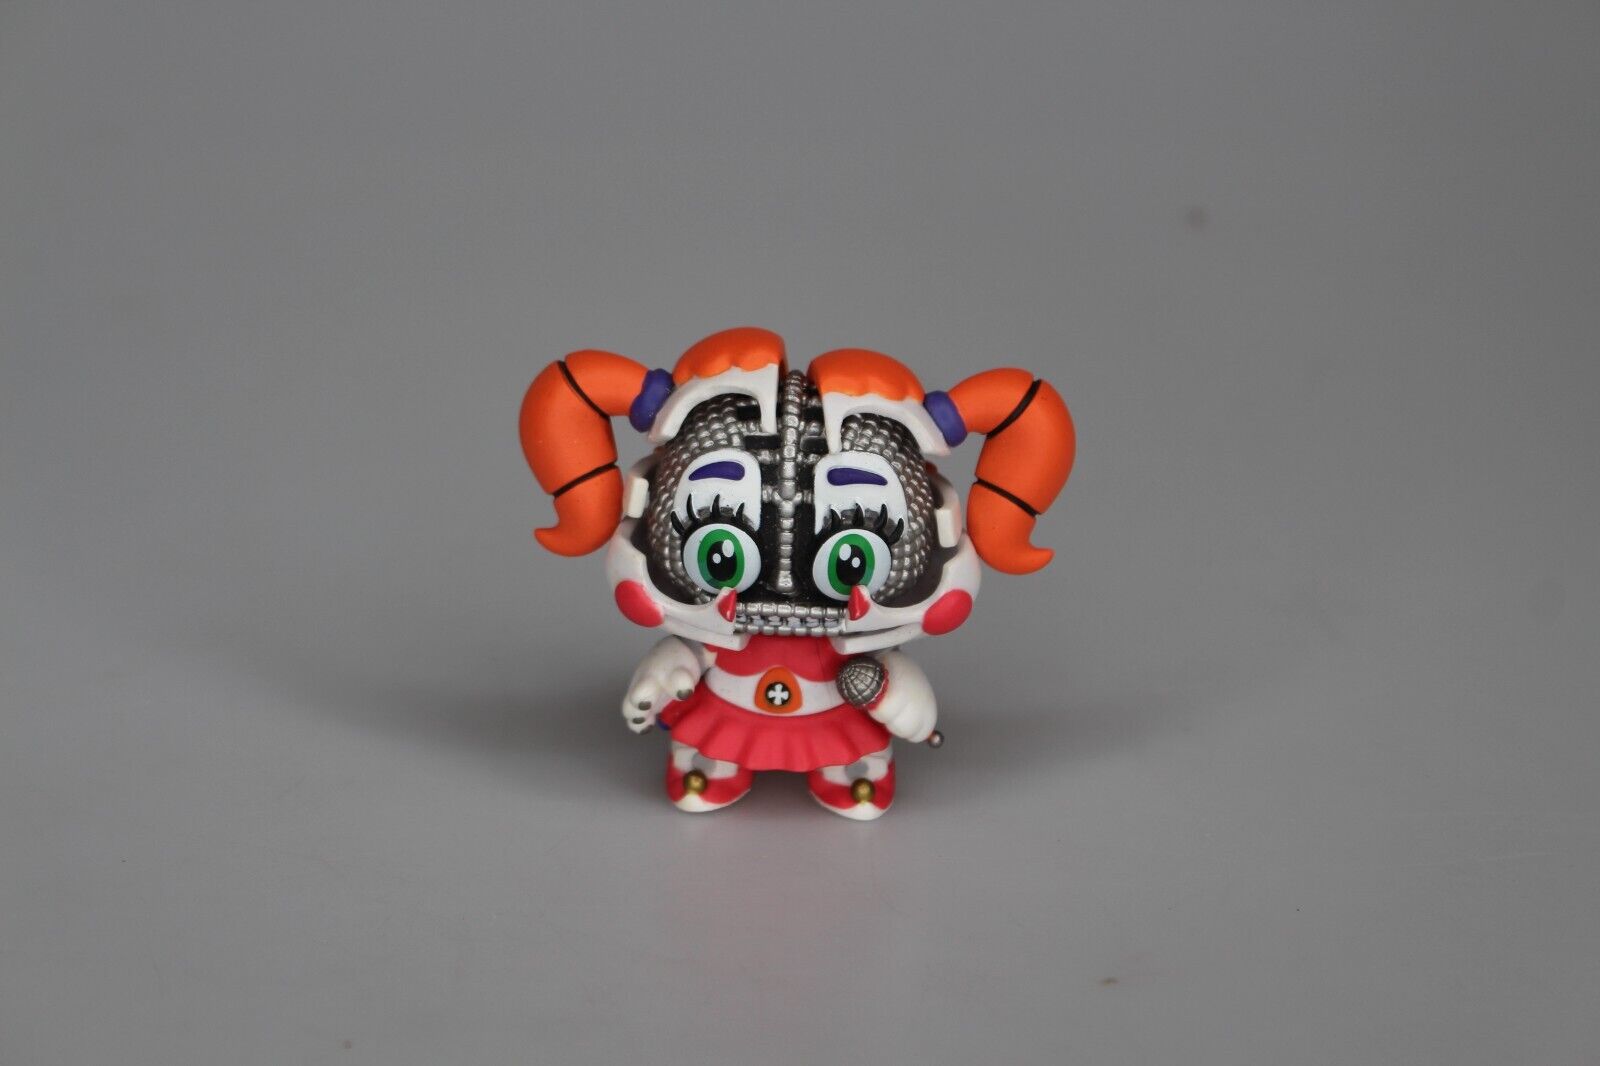 Jump Scare Circus Baby- FNAF / FUNKO MYSTERY MINI - SISTER LOCATION